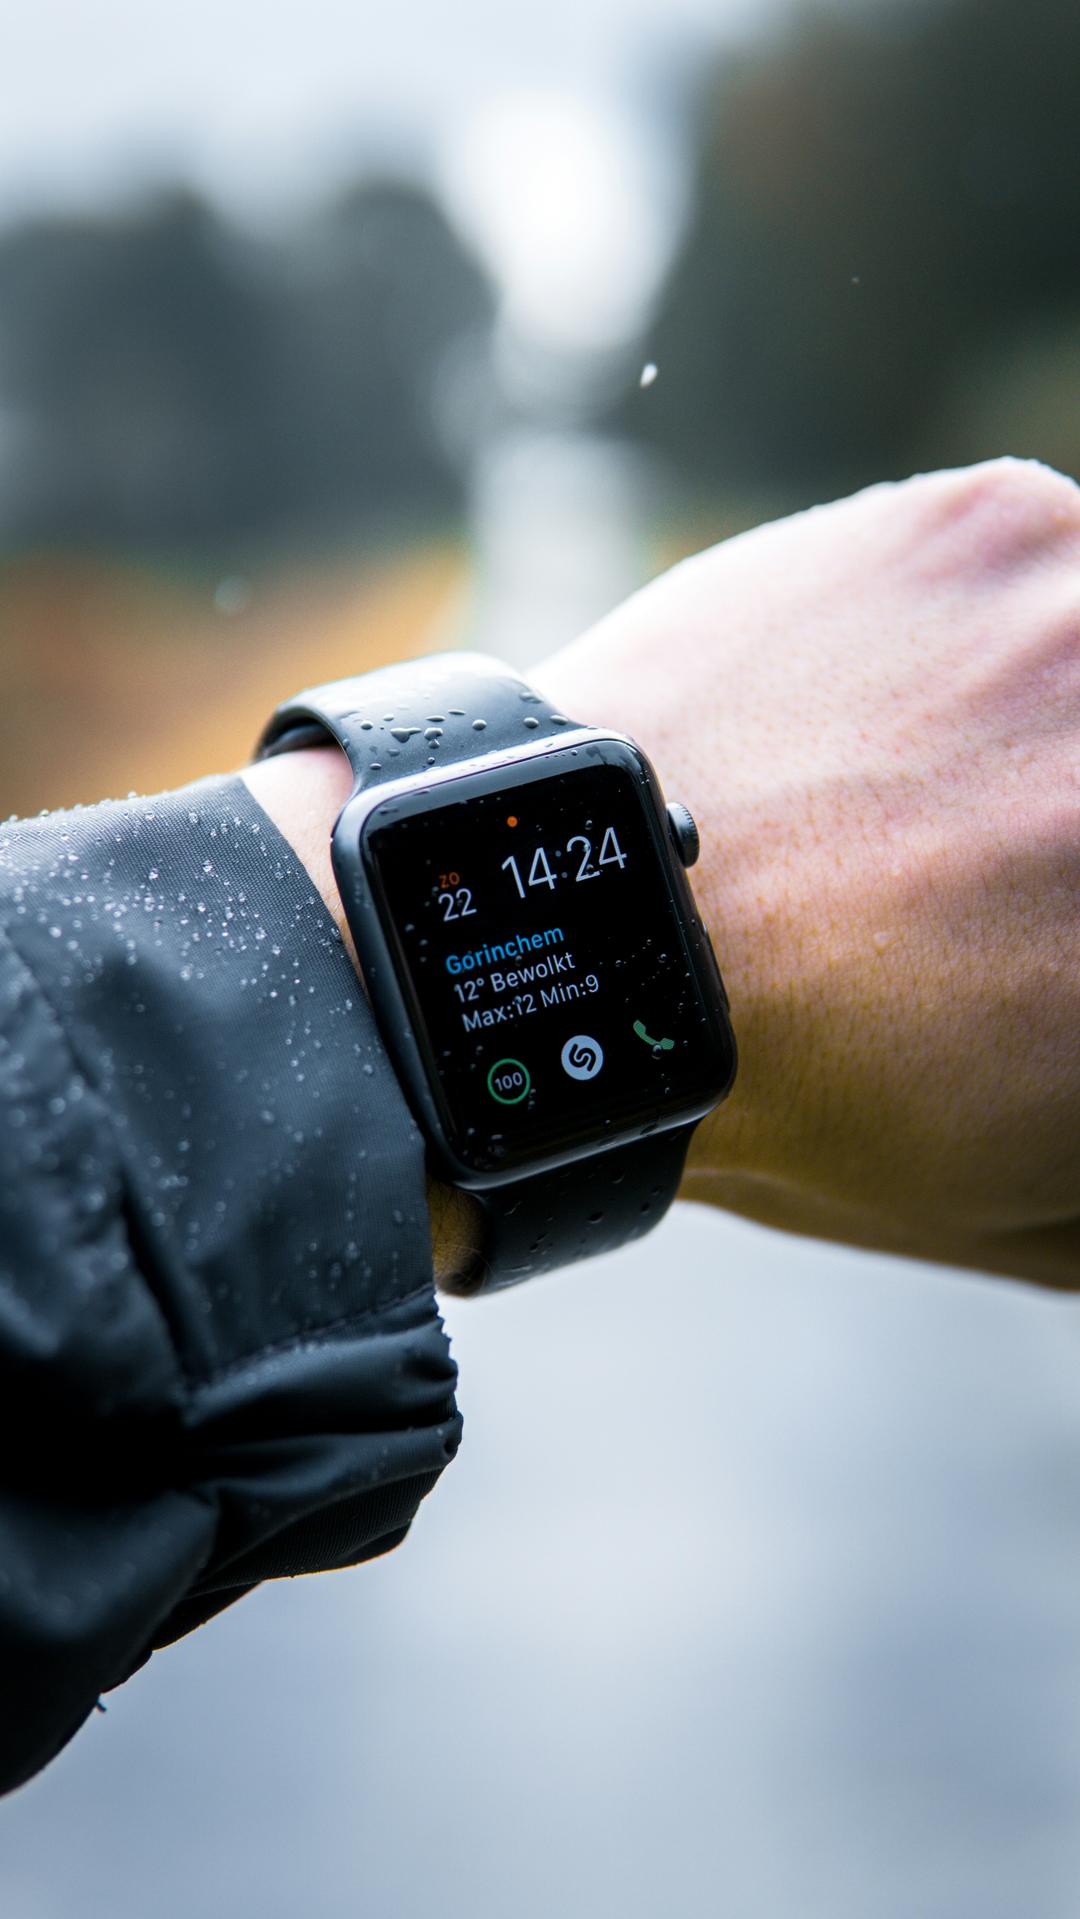 The Smartwatch X3 is a feature-packed wearable device that combines style with functionality. It tracks your heart rate, steps, and calories burned, while also providing notifications for calls, messages, and social media. With its sleek design and durable build, the Smartwatch X3 is perfect for active individuals.